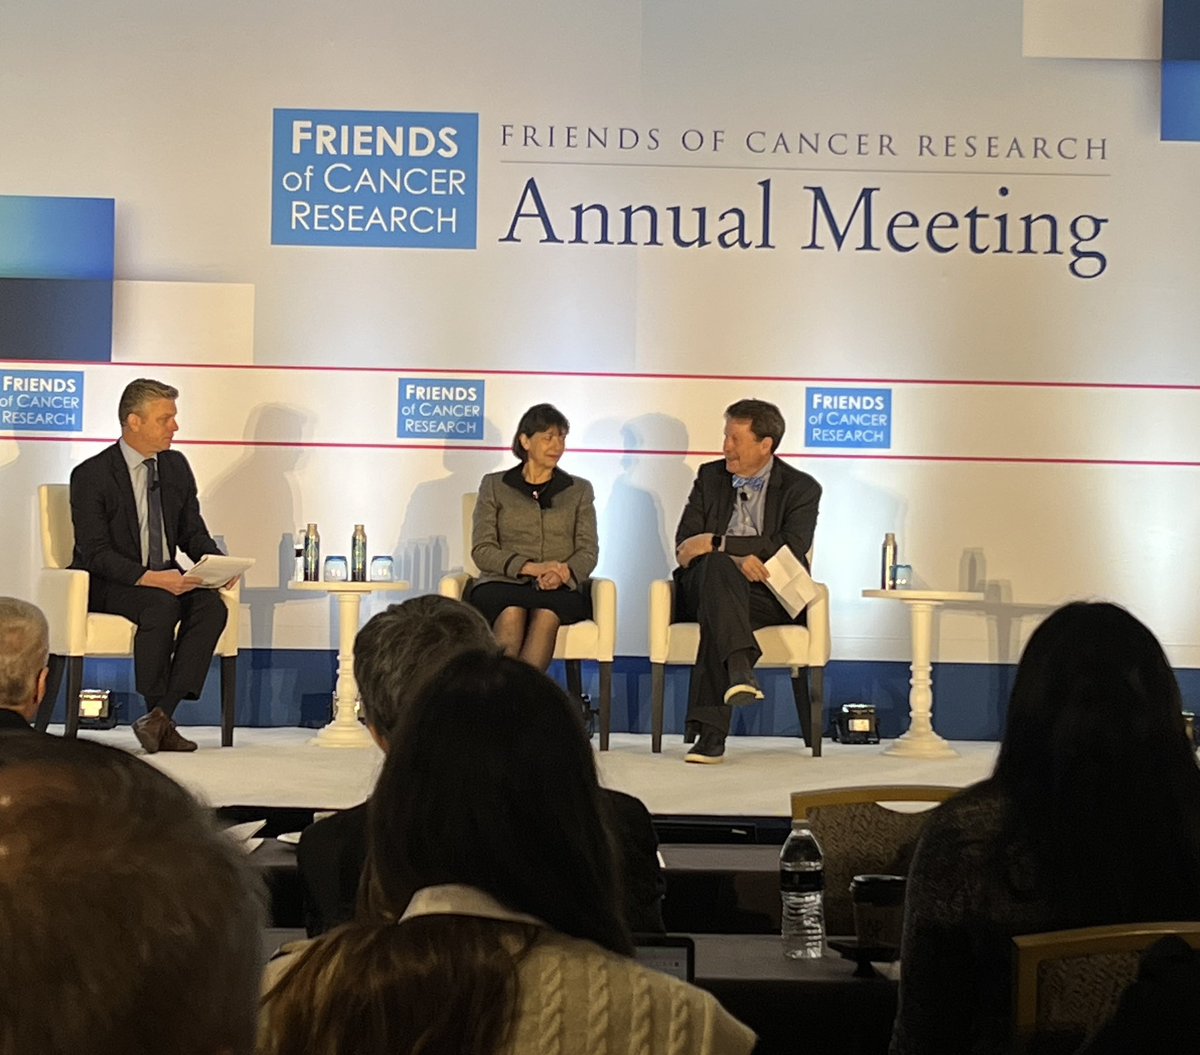 At the @CancerResrch Annual Meeting - @NIHDirector and @DrCaliff_FDA emphasize that where appropriate cancer clinical trials need to be simplified to generate better evidence. #FriendsAM23